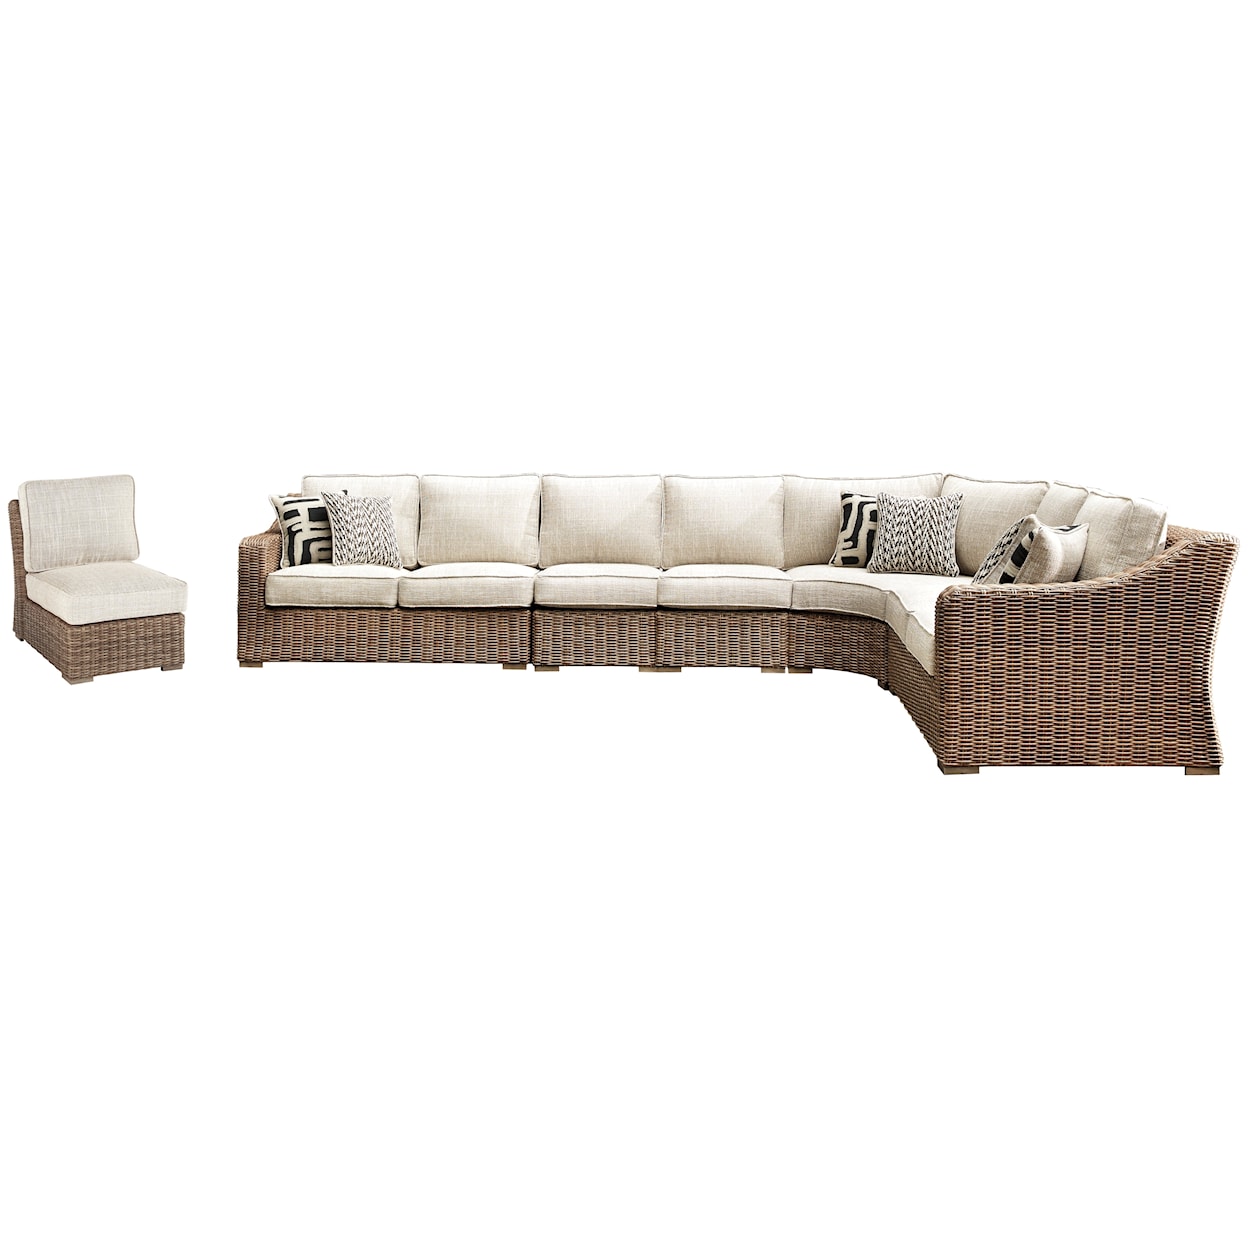 Signature Design by Ashley Beachcroft 6-Piece Outdoor Seating Set